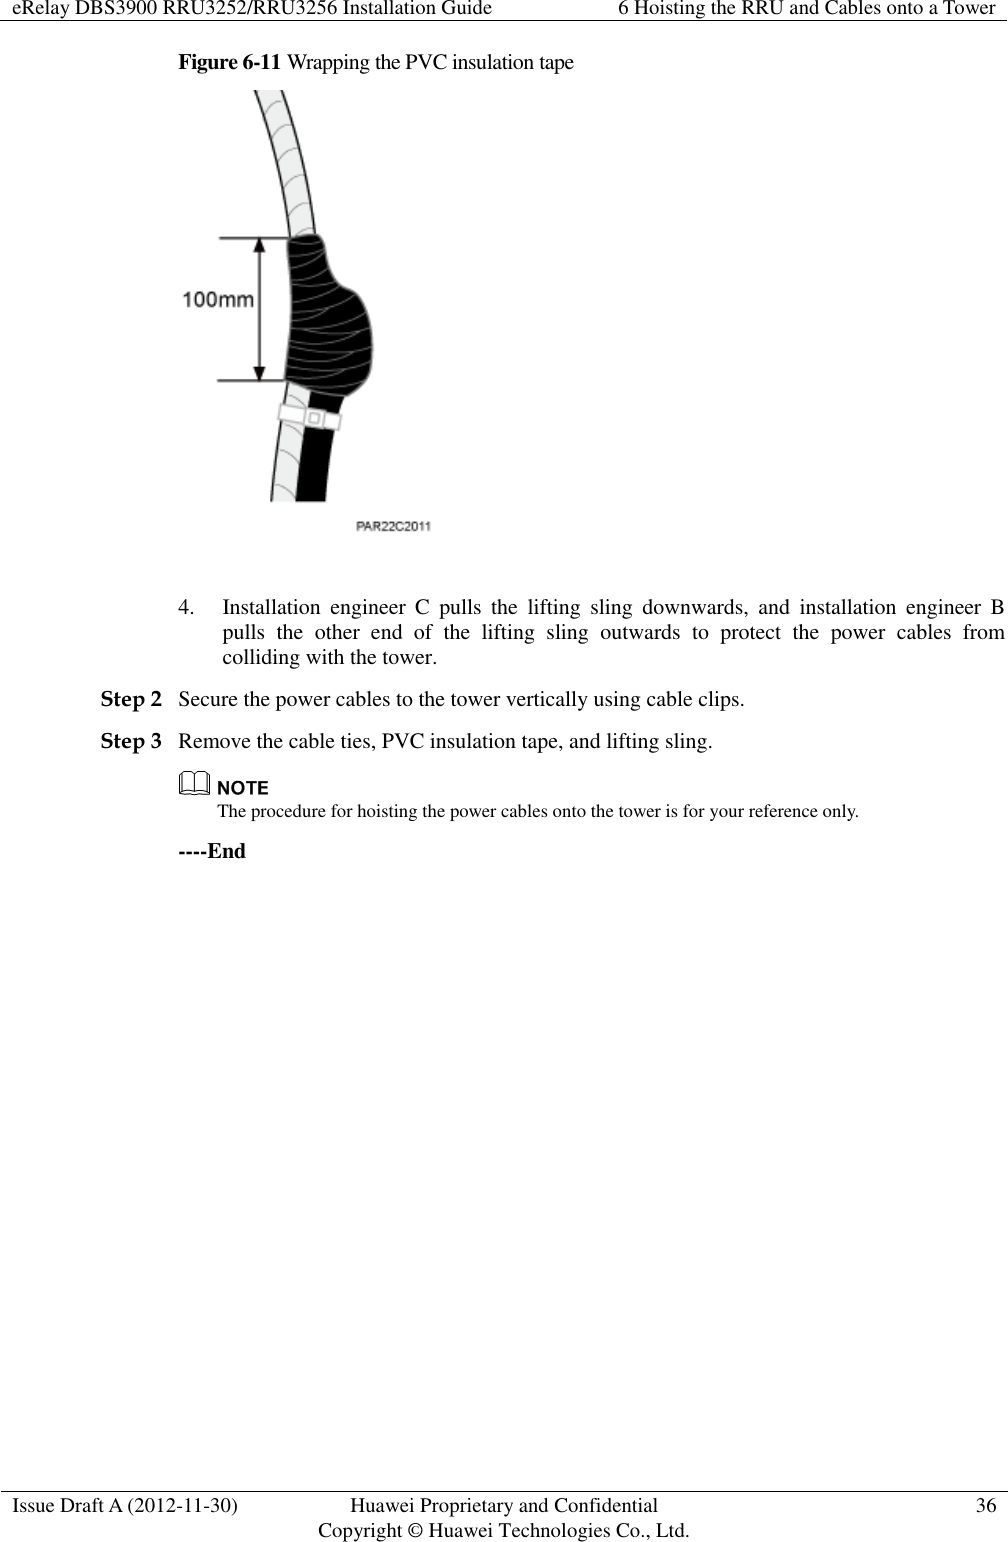 eRelay DBS3900 RRU3252/RRU3256 Installation Guide 6 Hoisting the RRU and Cables onto a Tower  Issue Draft A (2012-11-30) Huawei Proprietary and Confidential                                     Copyright © Huawei Technologies Co., Ltd. 36  Figure 6-11 Wrapping the PVC insulation tape   4. Installation  engineer  C  pulls  the  lifting  sling  downwards,  and  installation  engineer  B pulls  the  other  end  of  the  lifting  sling  outwards  to  protect  the  power  cables  from colliding with the tower. Step 2 Secure the power cables to the tower vertically using cable clips. Step 3 Remove the cable ties, PVC insulation tape, and lifting sling.  The procedure for hoisting the power cables onto the tower is for your reference only. ----End 